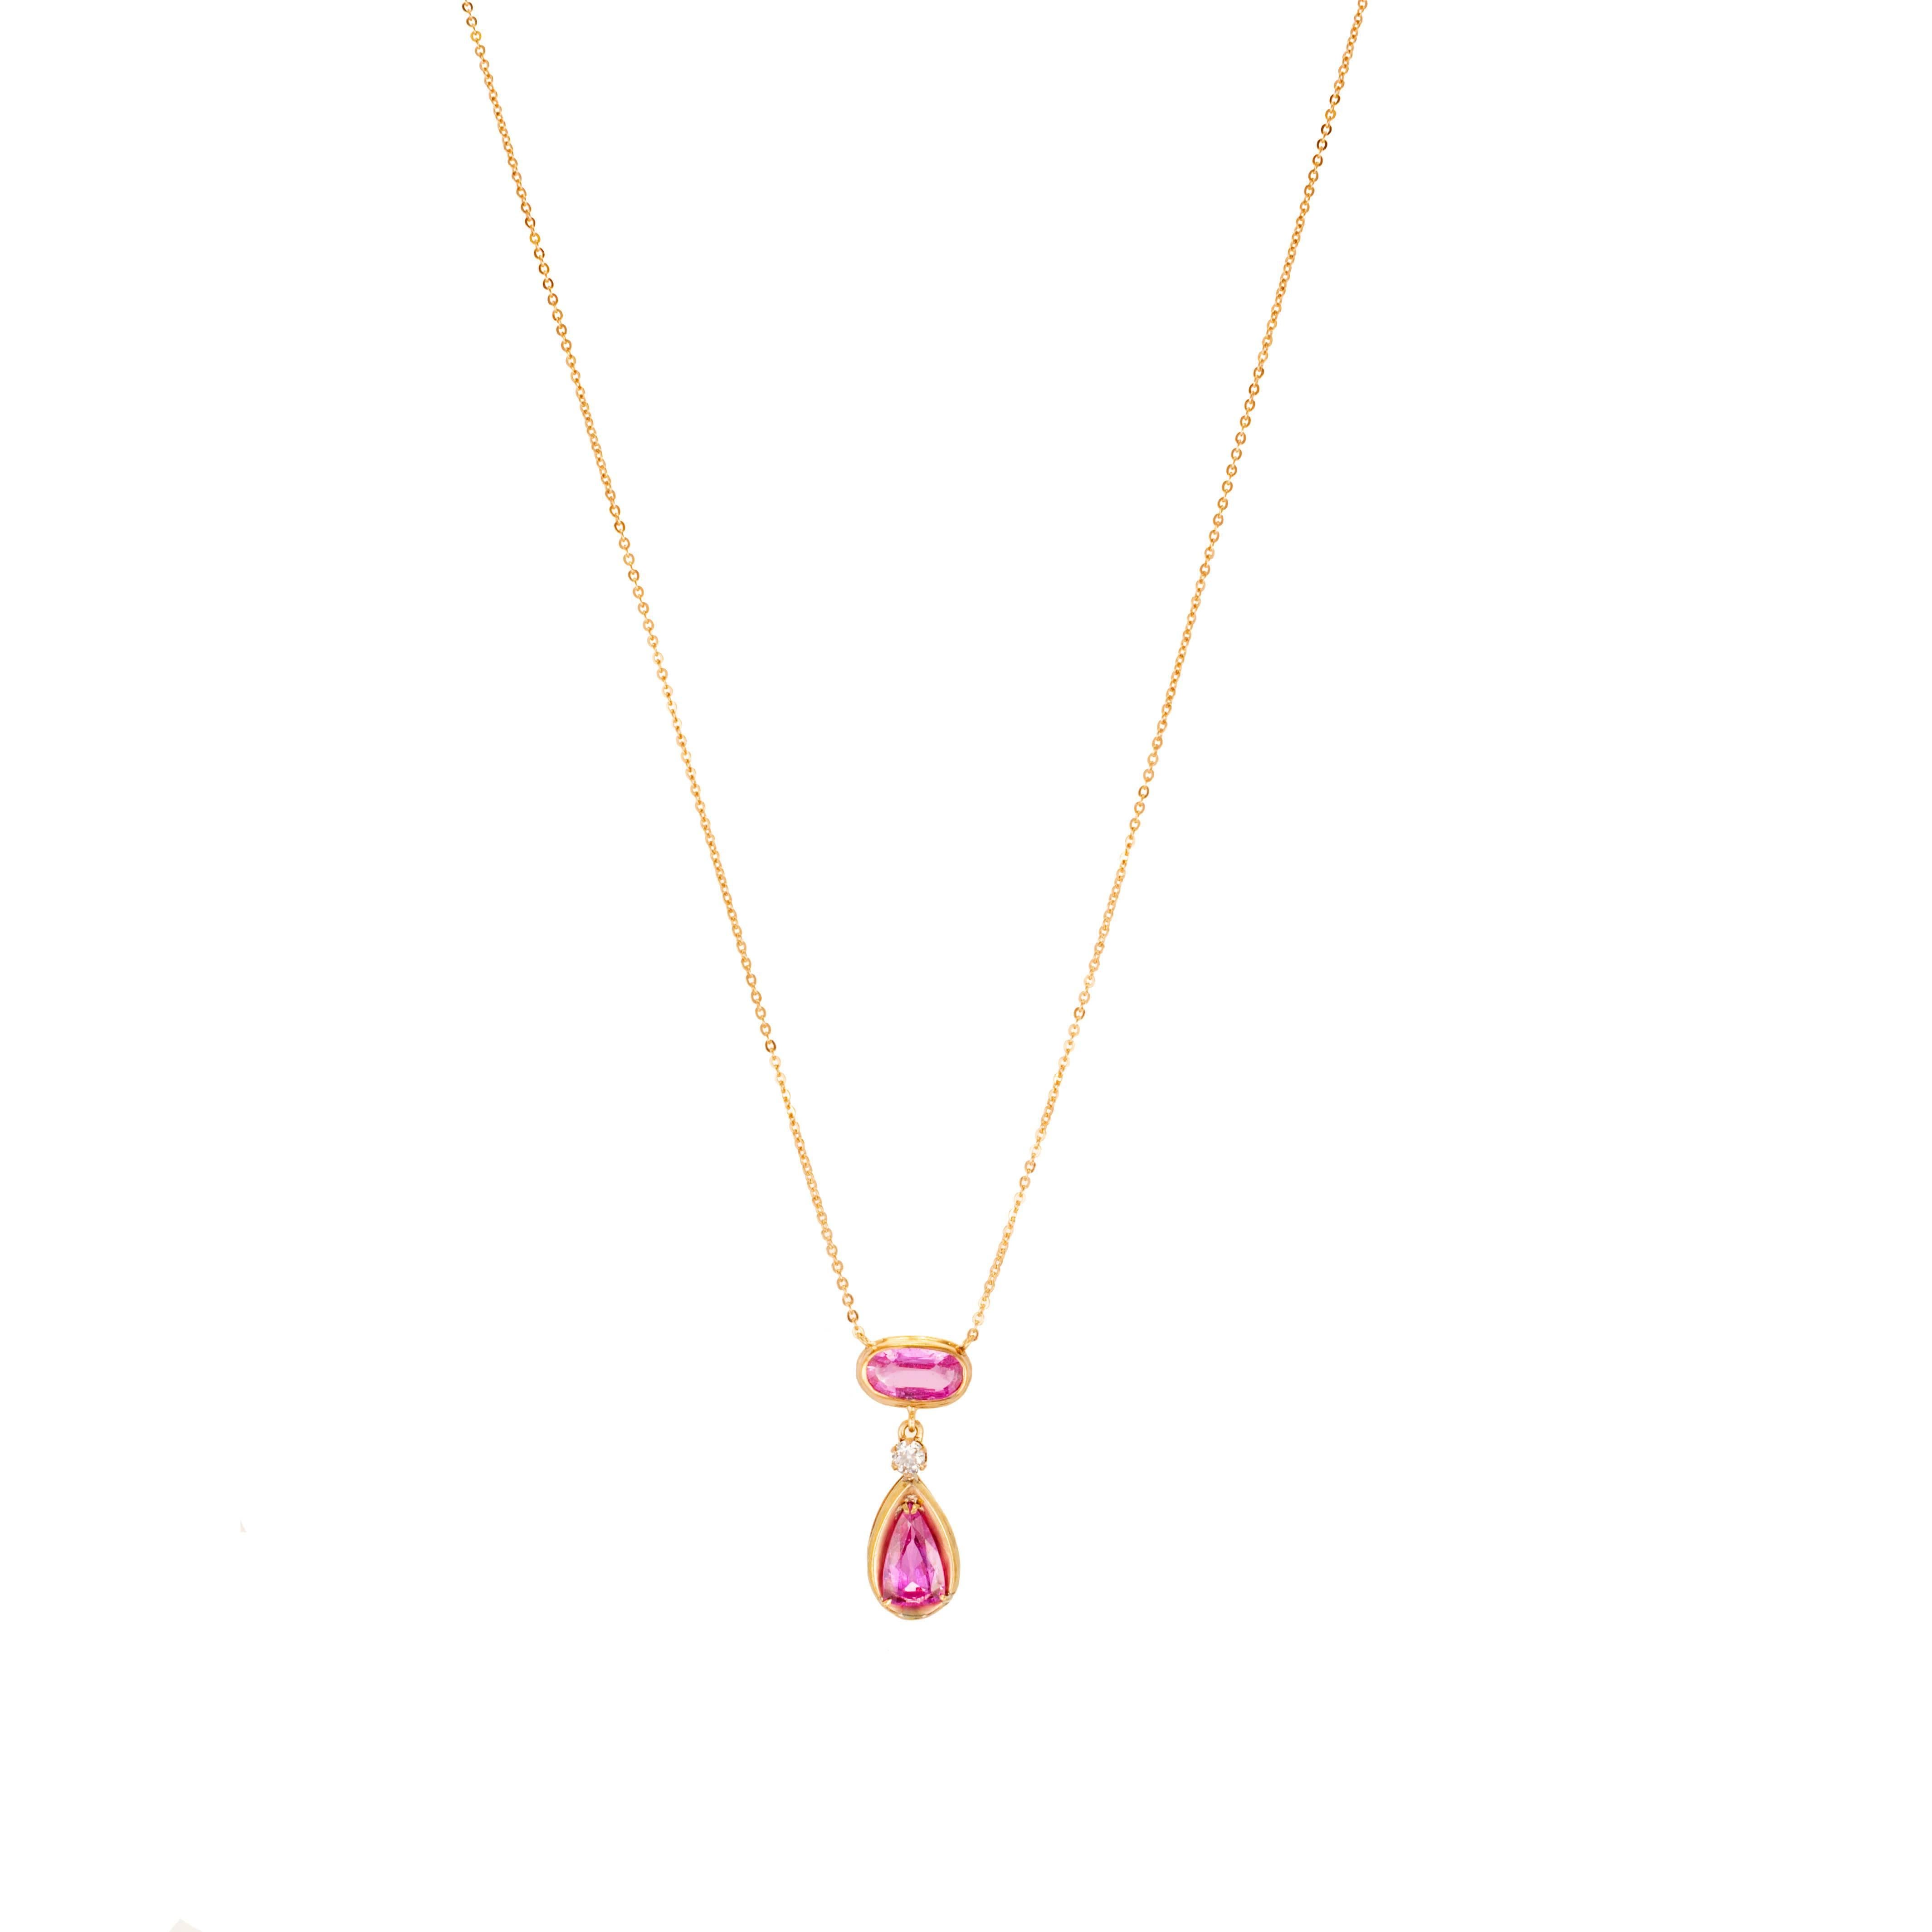 GIA Certified 4.85 Carat Pear Pink Sapphire Diamond Rose Gold Pendant Necklace In Good Condition For Sale In Stamford, CT